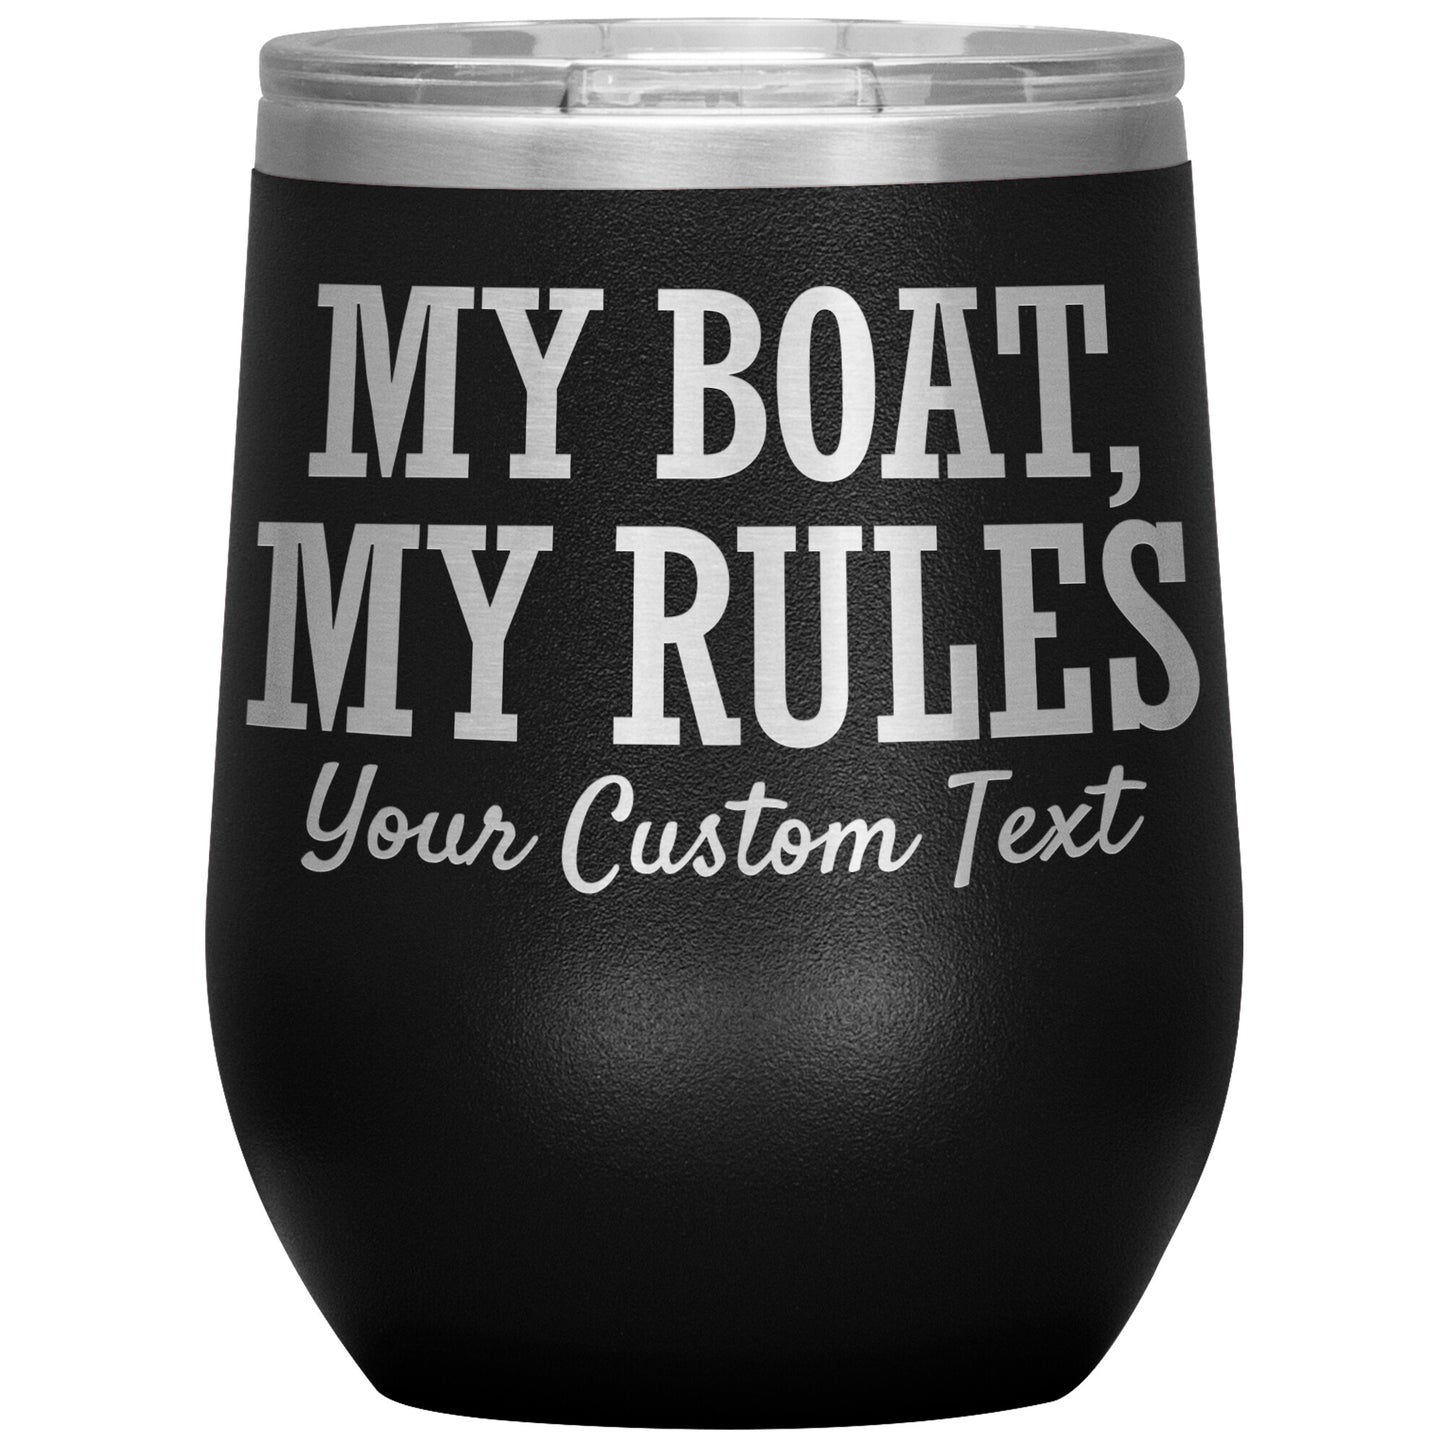 Personalized My Boat My Rules 12oz Wine Tumbler - Smith Mountain Lake Gift